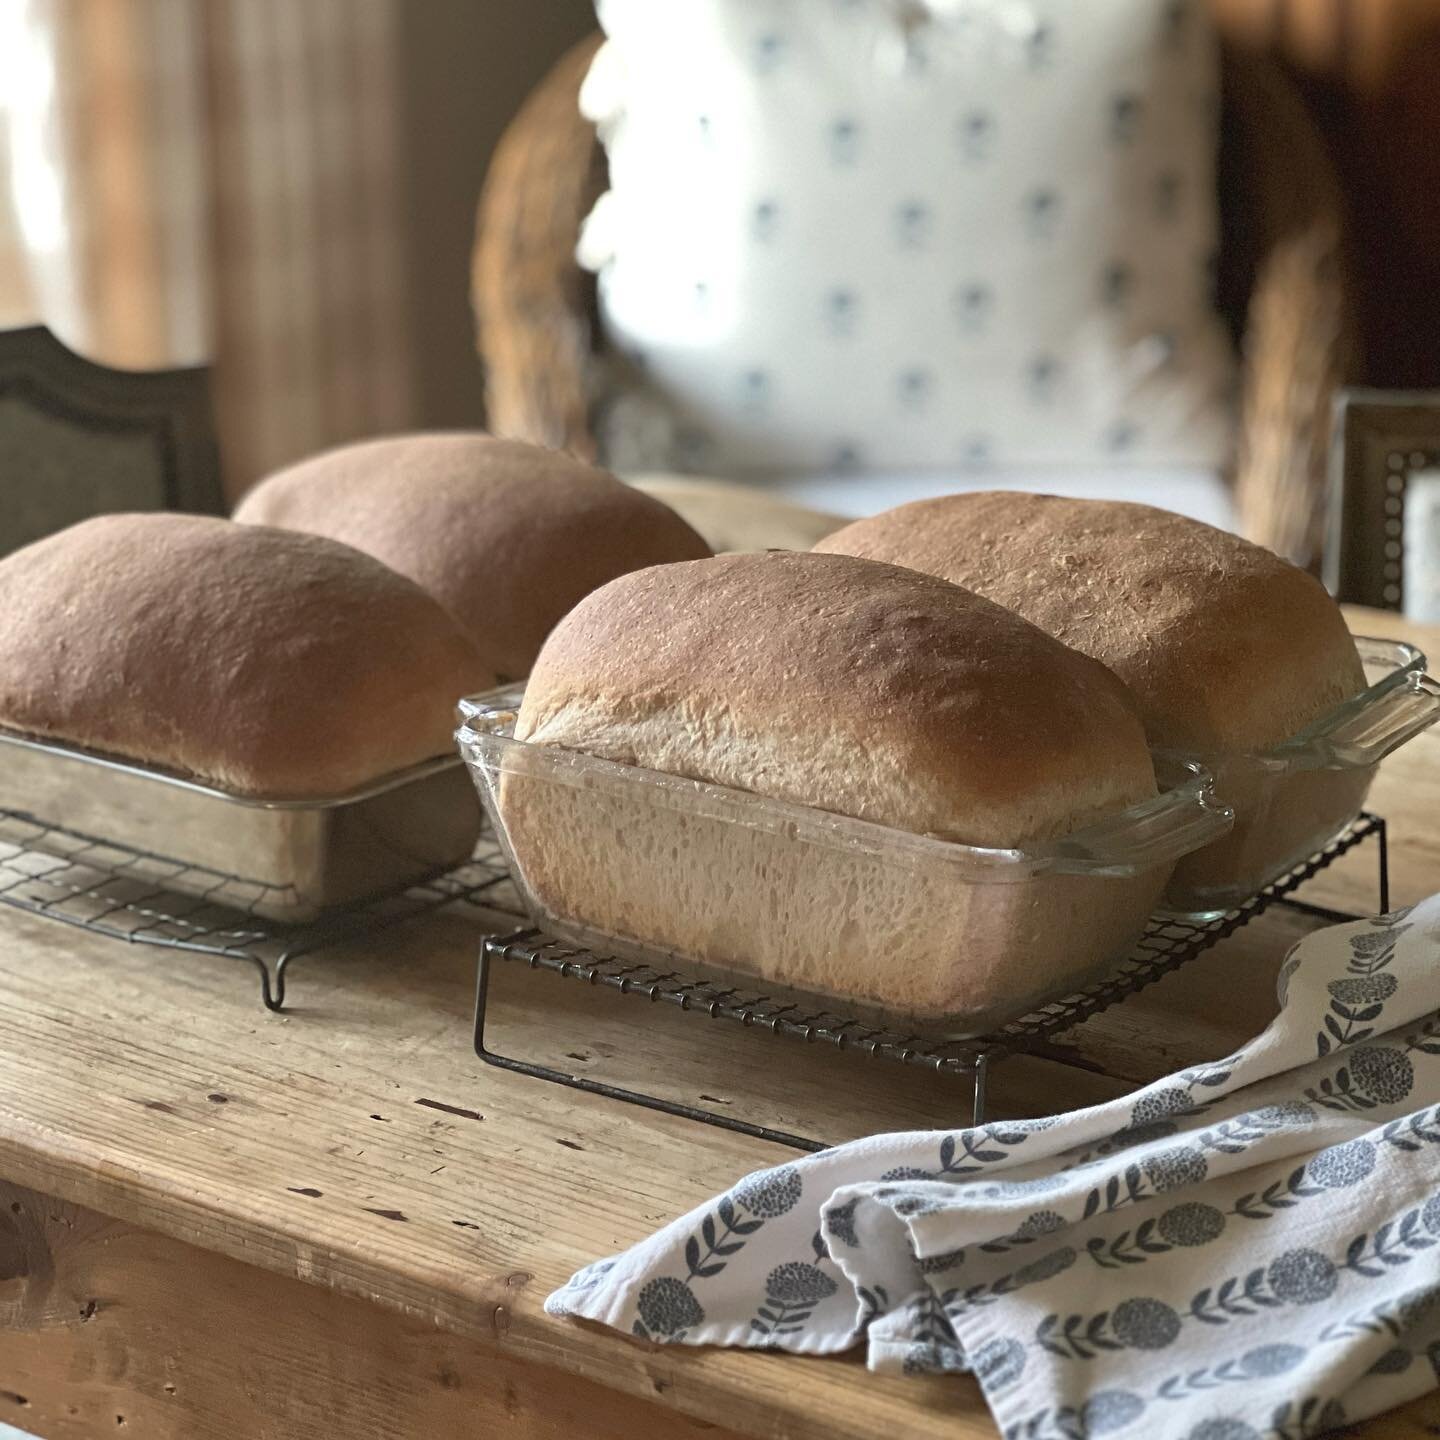 After the initial craziness of 2020, I began to dig deeper into health, and things I could do to keep my family strong and healthy. One of those things has been making our own bread. It&rsquo;s been a learning curve for sure, especially with fresh mi